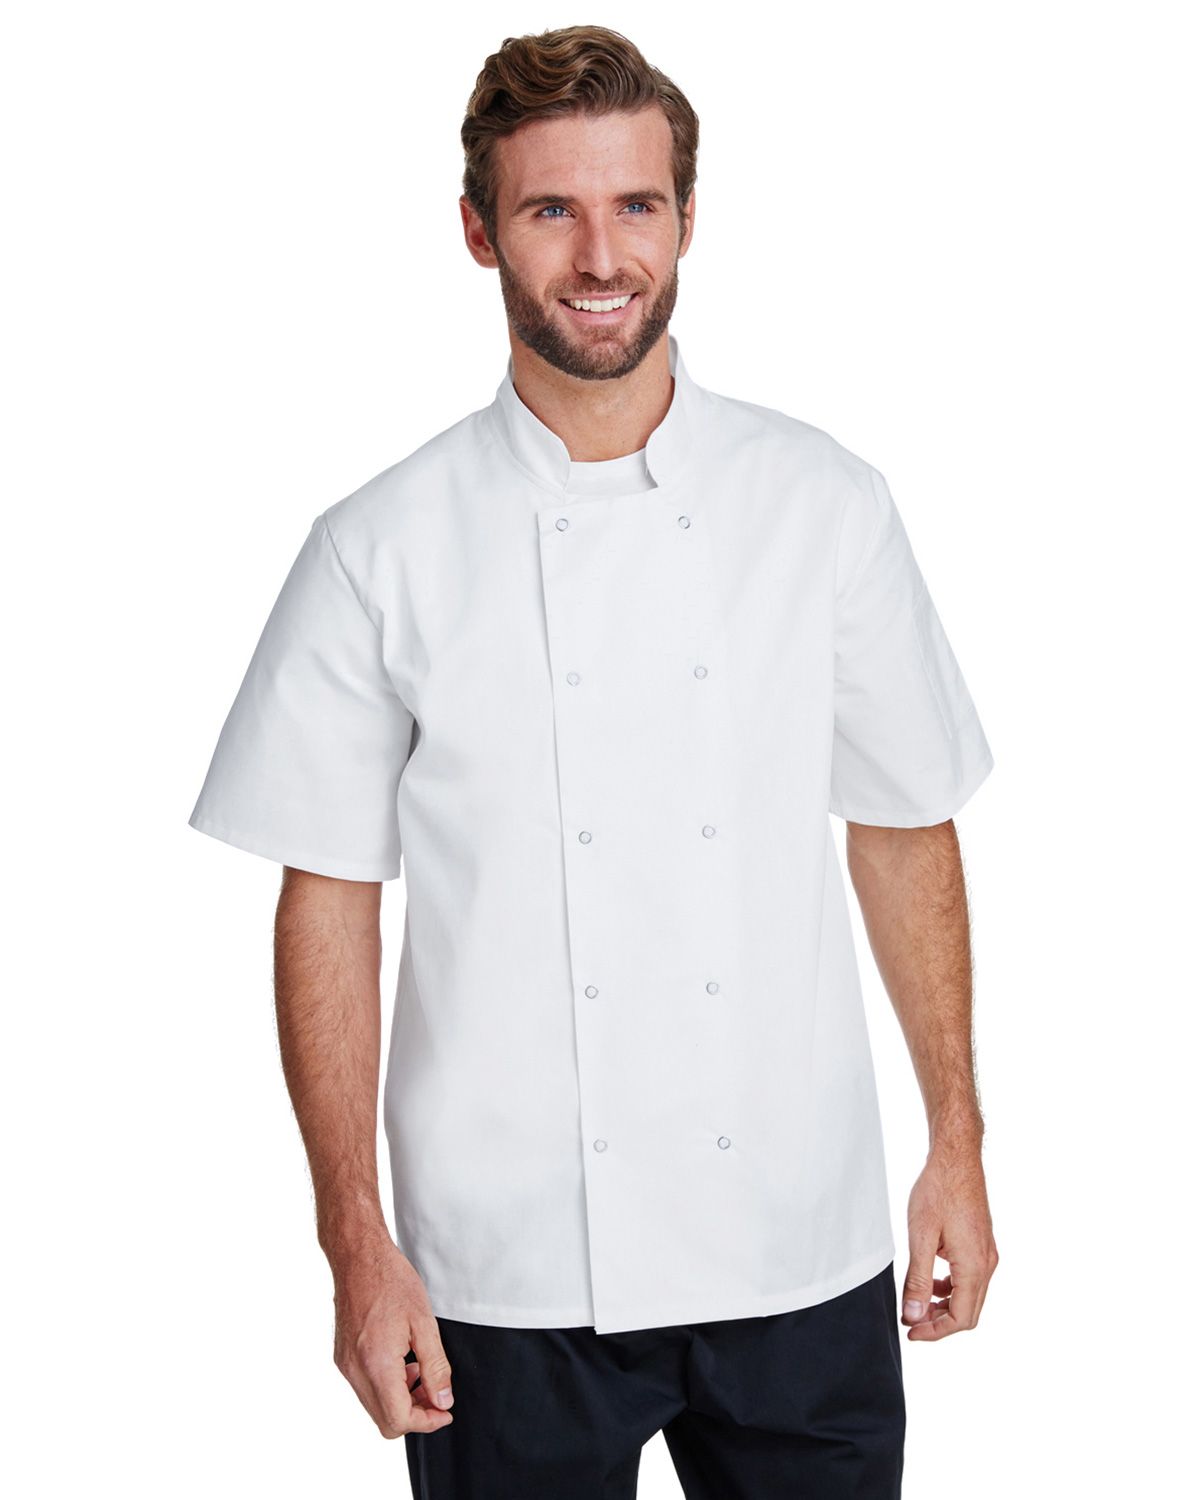 Artisan Collection RP664 Unisex Studded Front Short-Sleeve Chefs Jacket